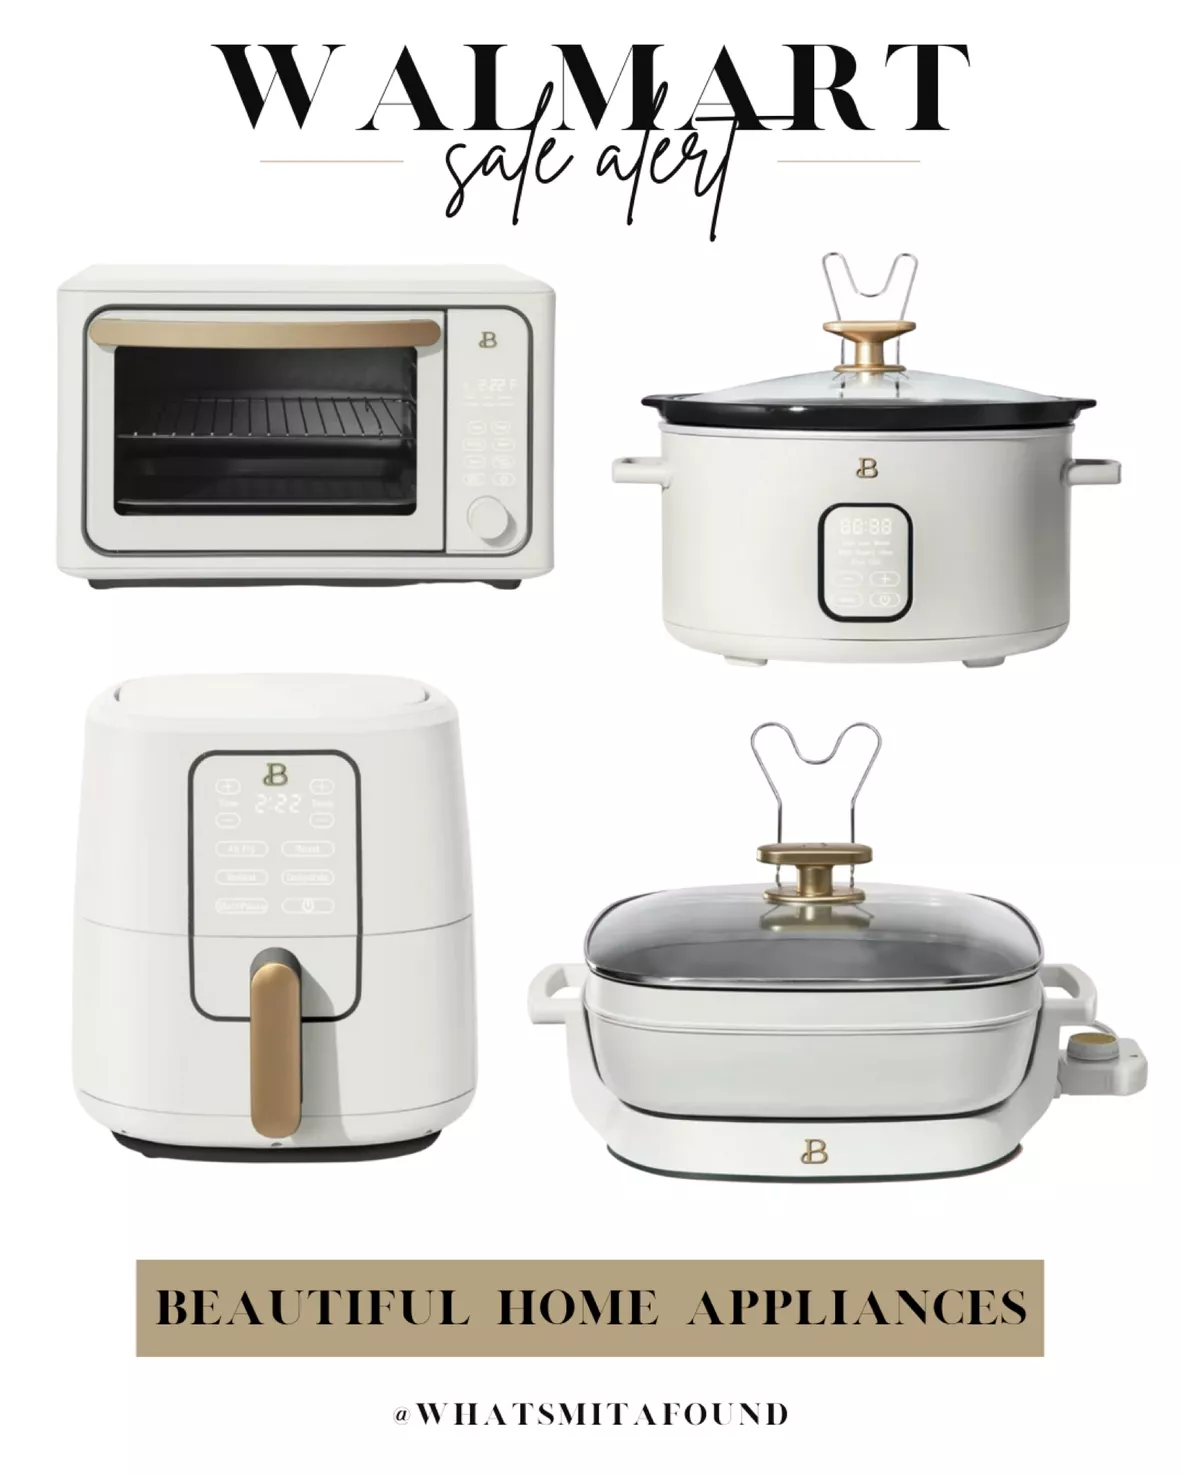 Drew Barrymore's $139 Appliance Is My New Counter Eye Candy